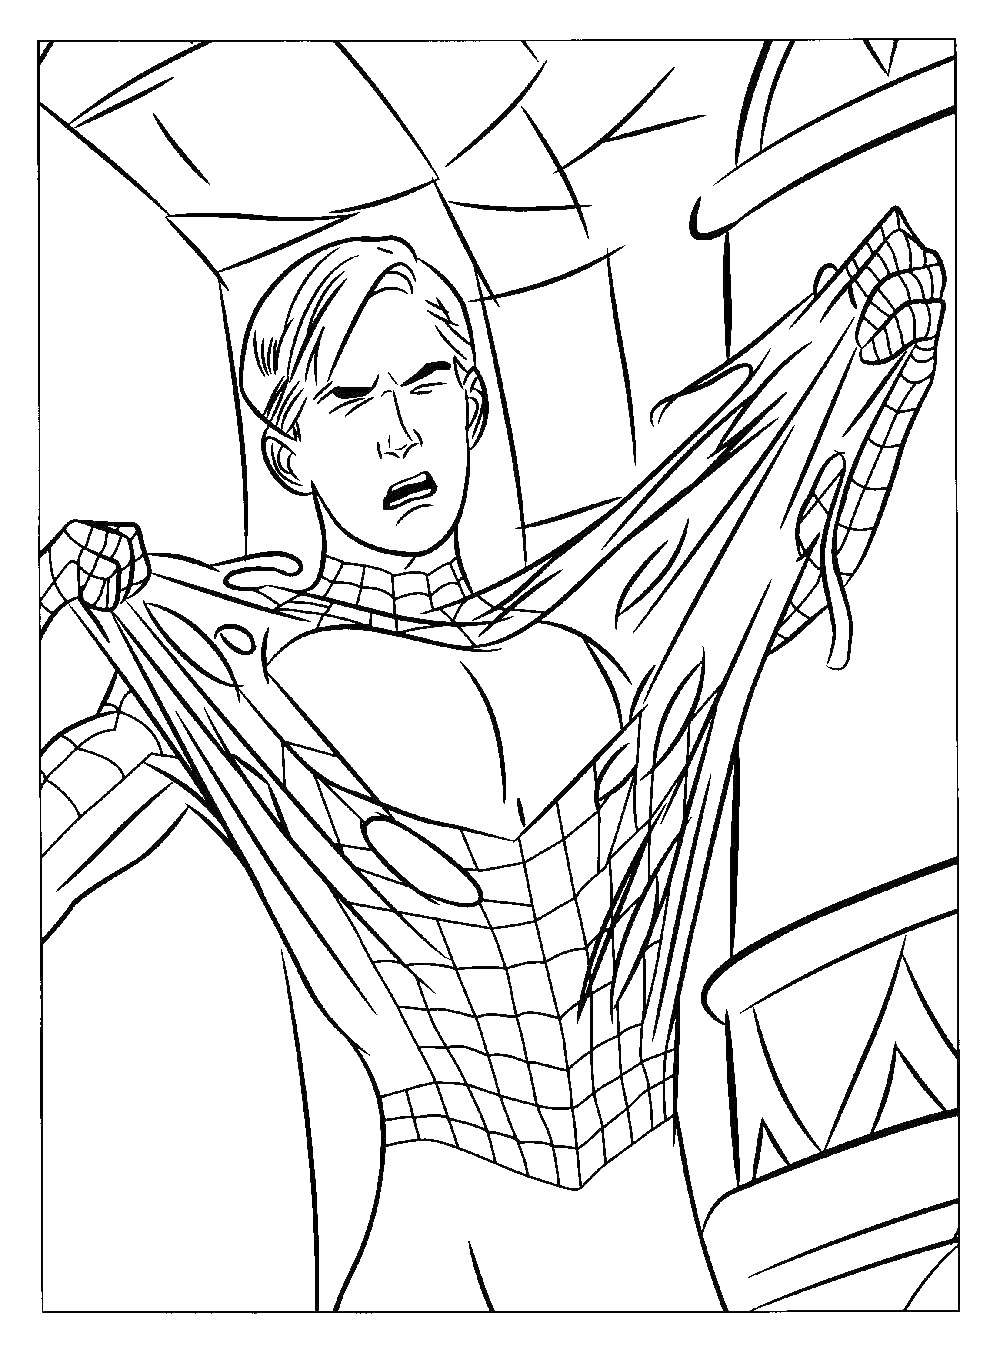 Coloring Peter Parker. Category coloring spiders. Tags:  Comics, Spider-Man, Spider-Man.